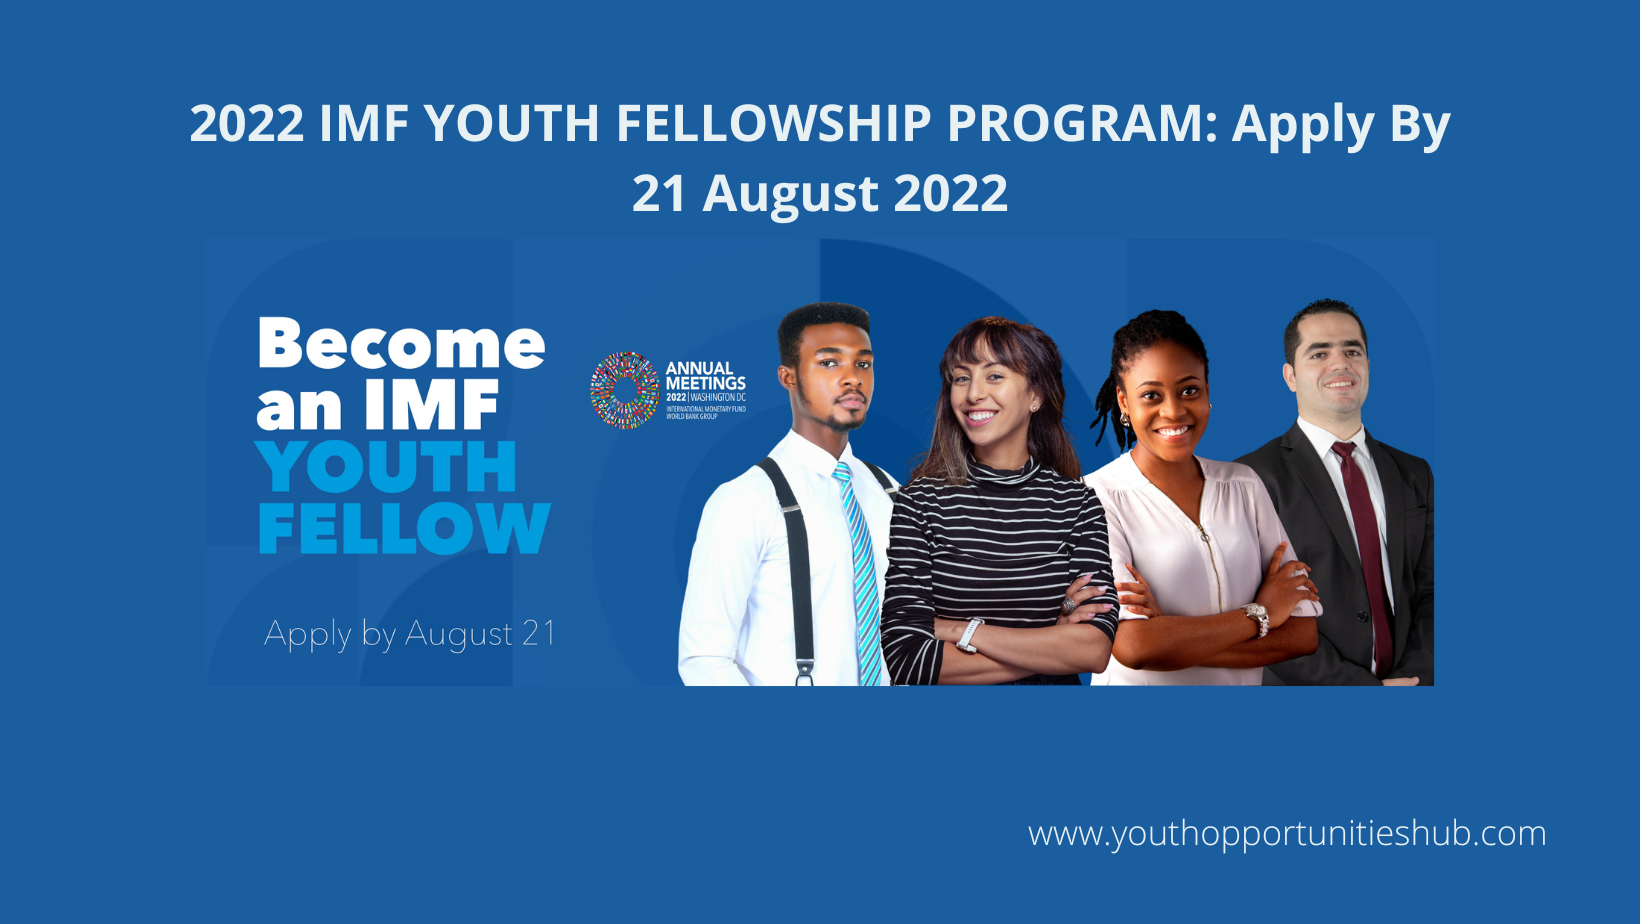 2022 IMF YOUTH FELLOWSHIP PROGRAM Apply By 21 August 2022 » Youth